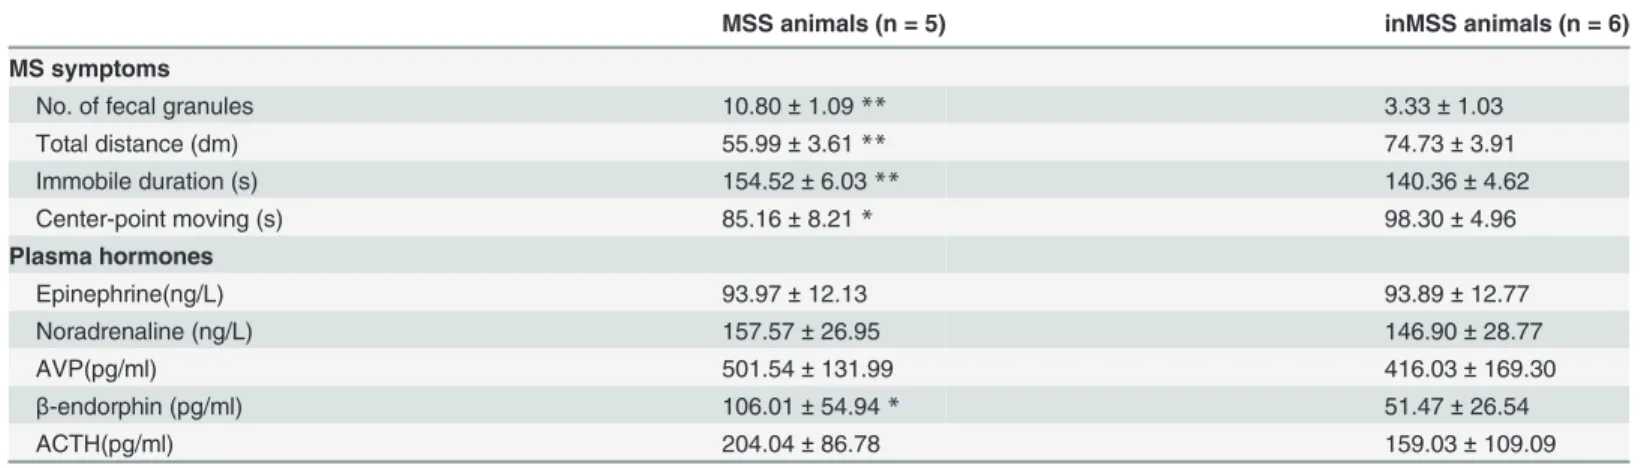 Table 2. MS symptoms and microarrayed plasma hormone levels of MSS-Rot and inMSS-Rot groups.